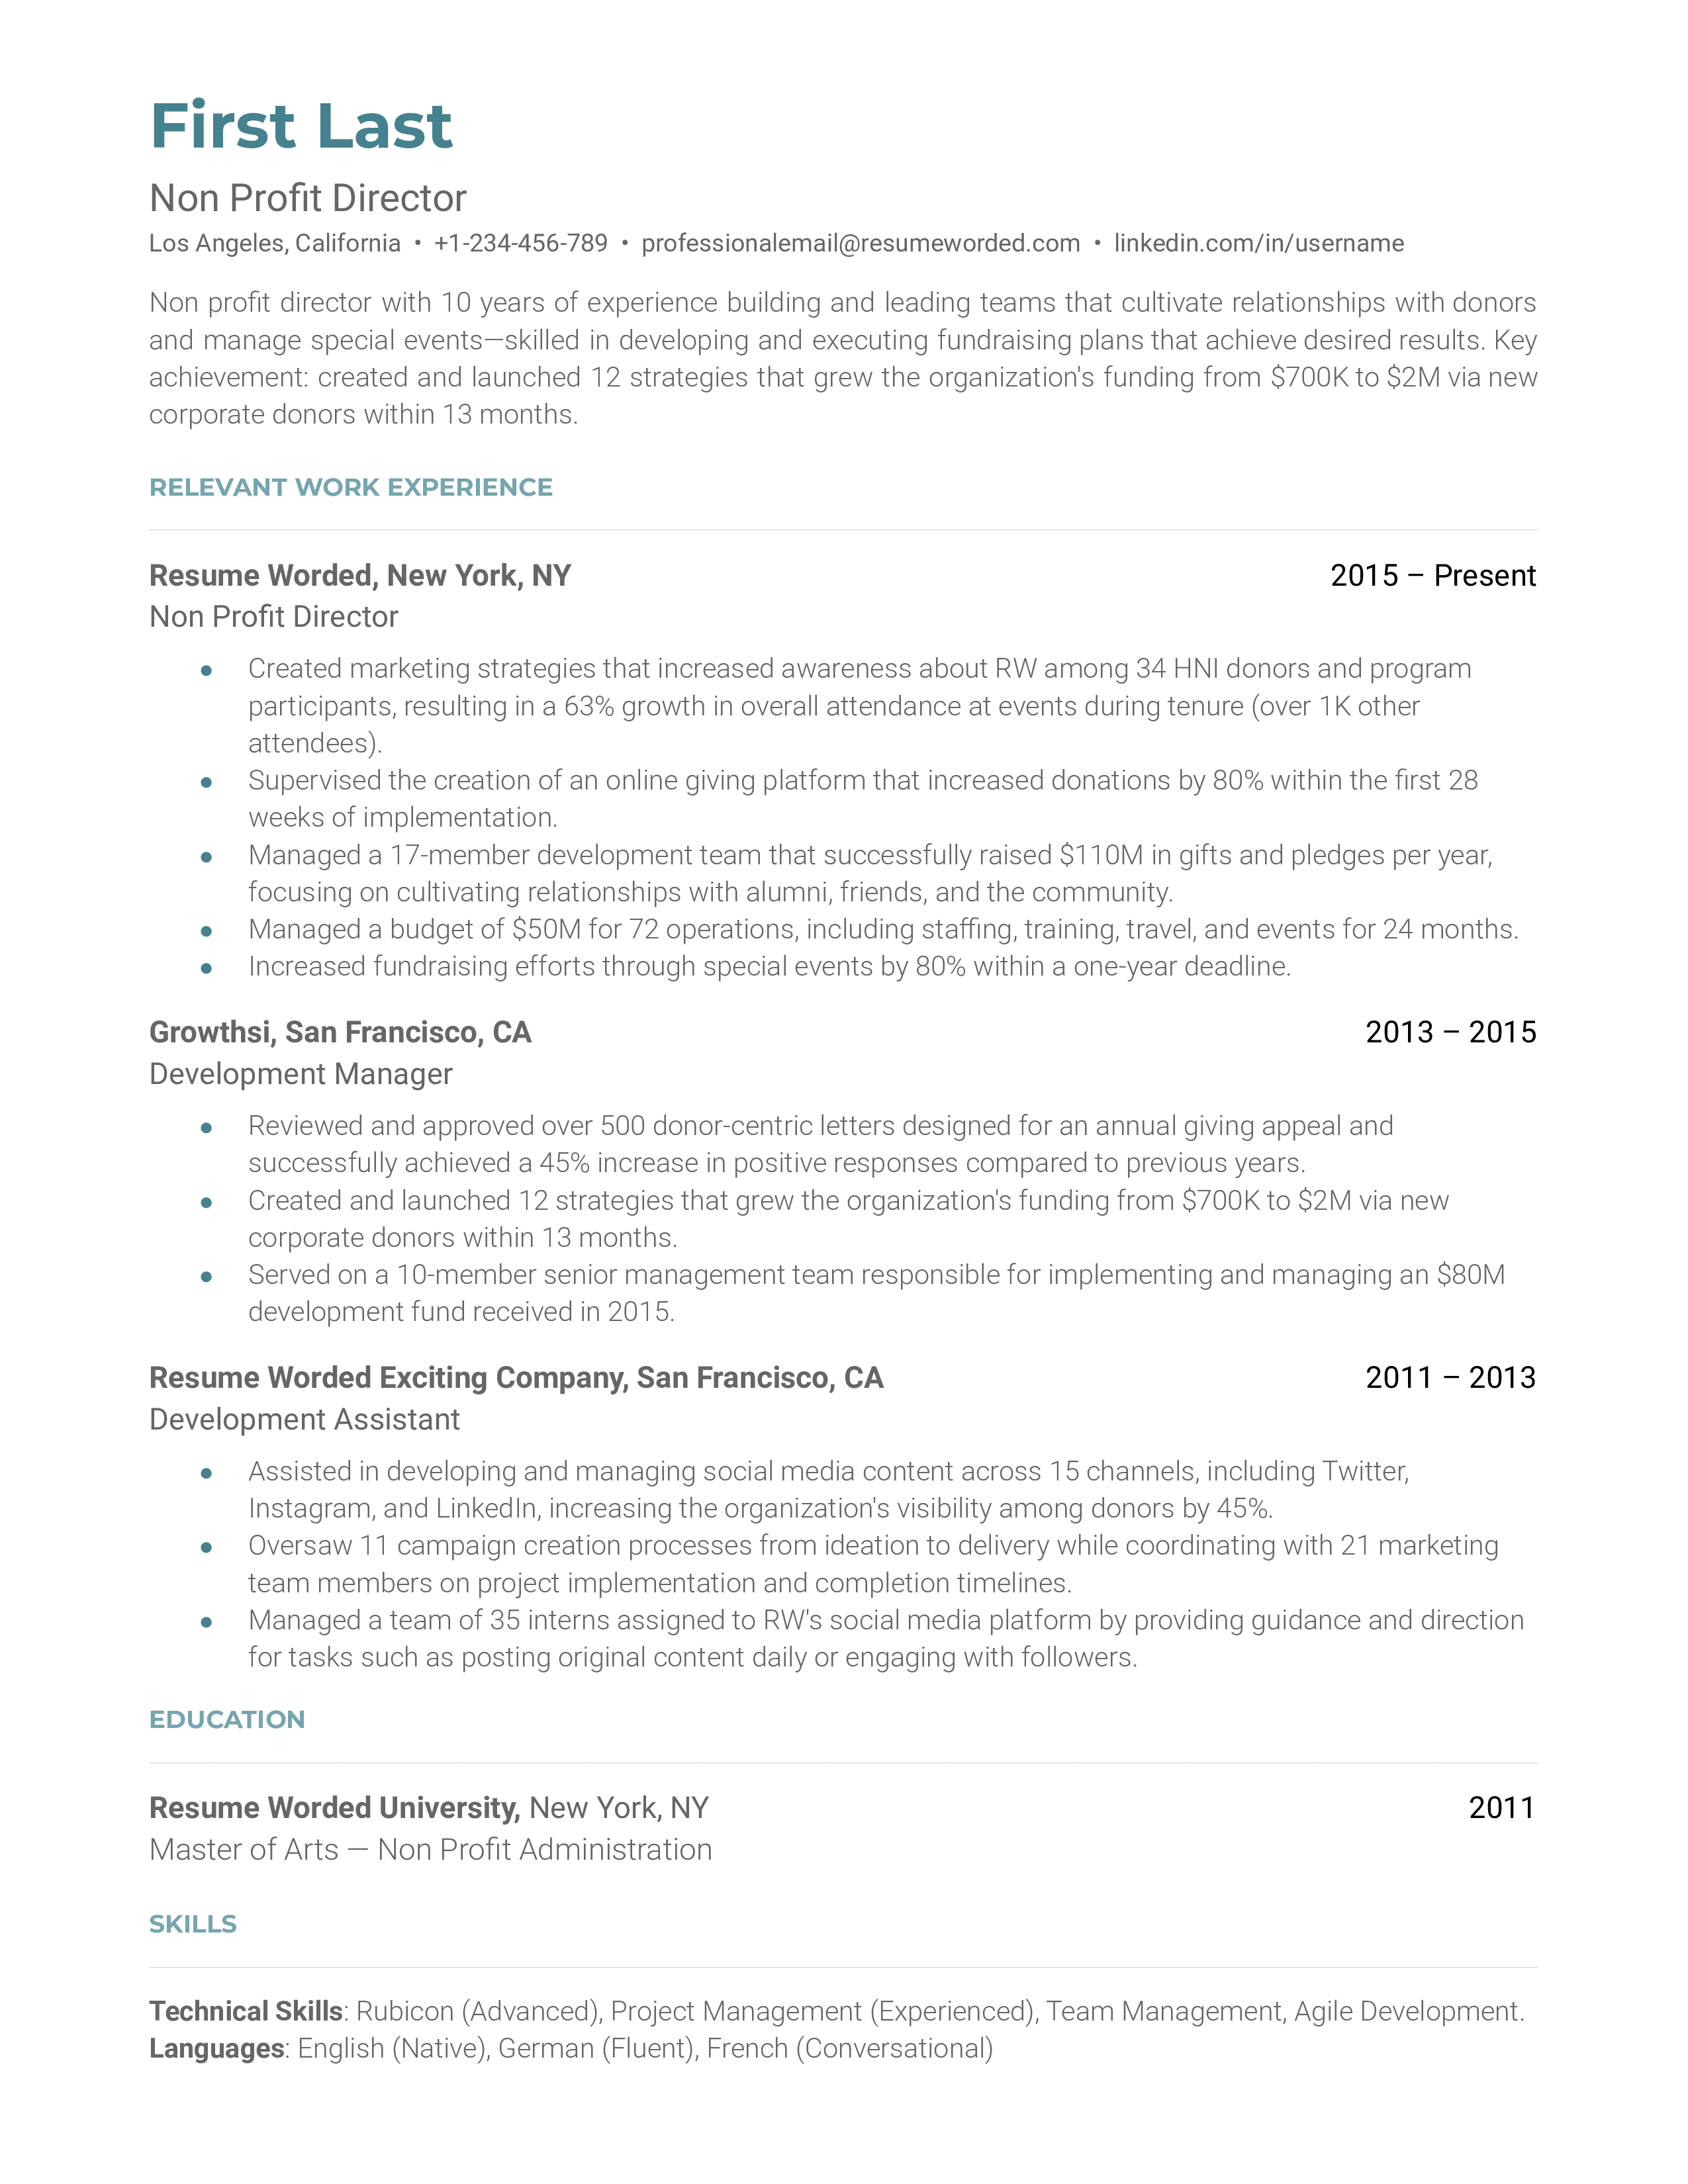 A non-profit director resume sample that highlights the applicant’s project management skills and career progression.